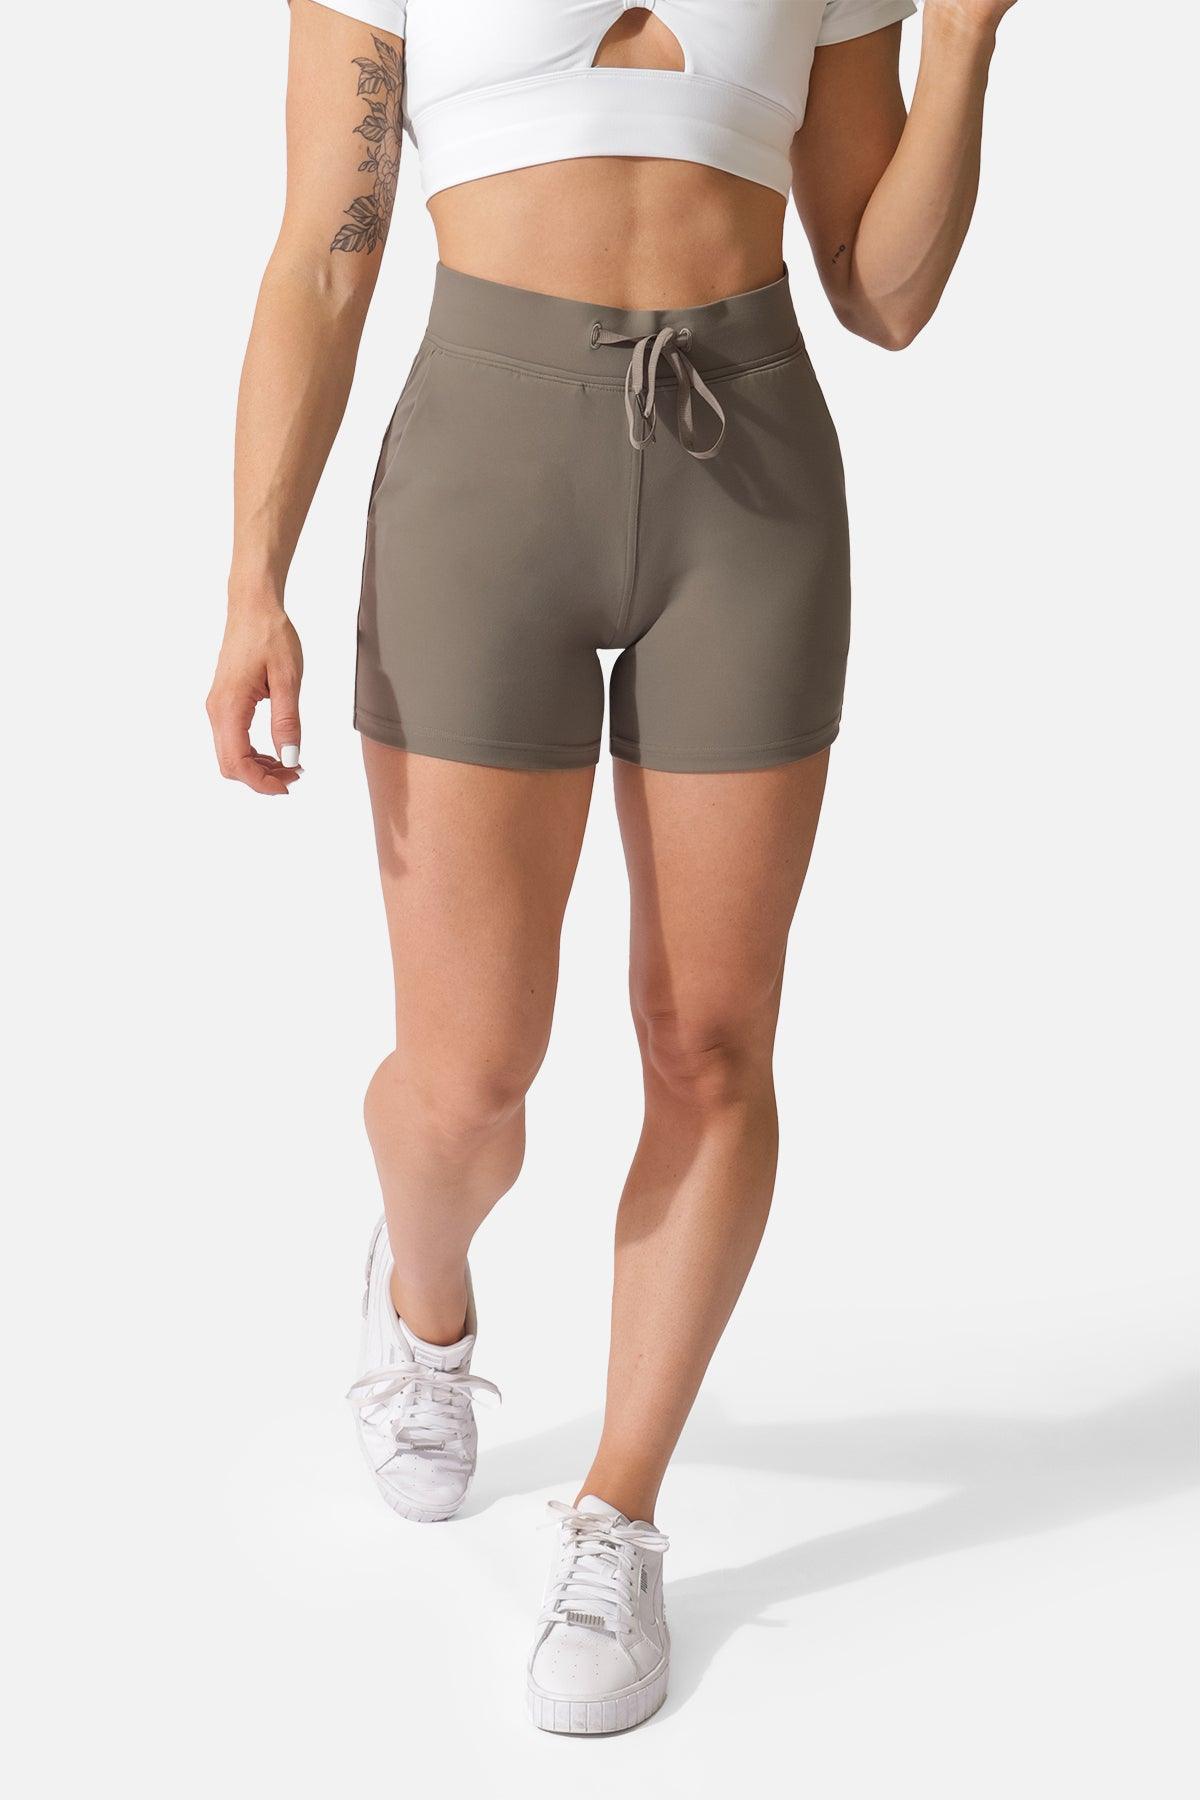 Serene Shorts - Olive - Jed North Canada